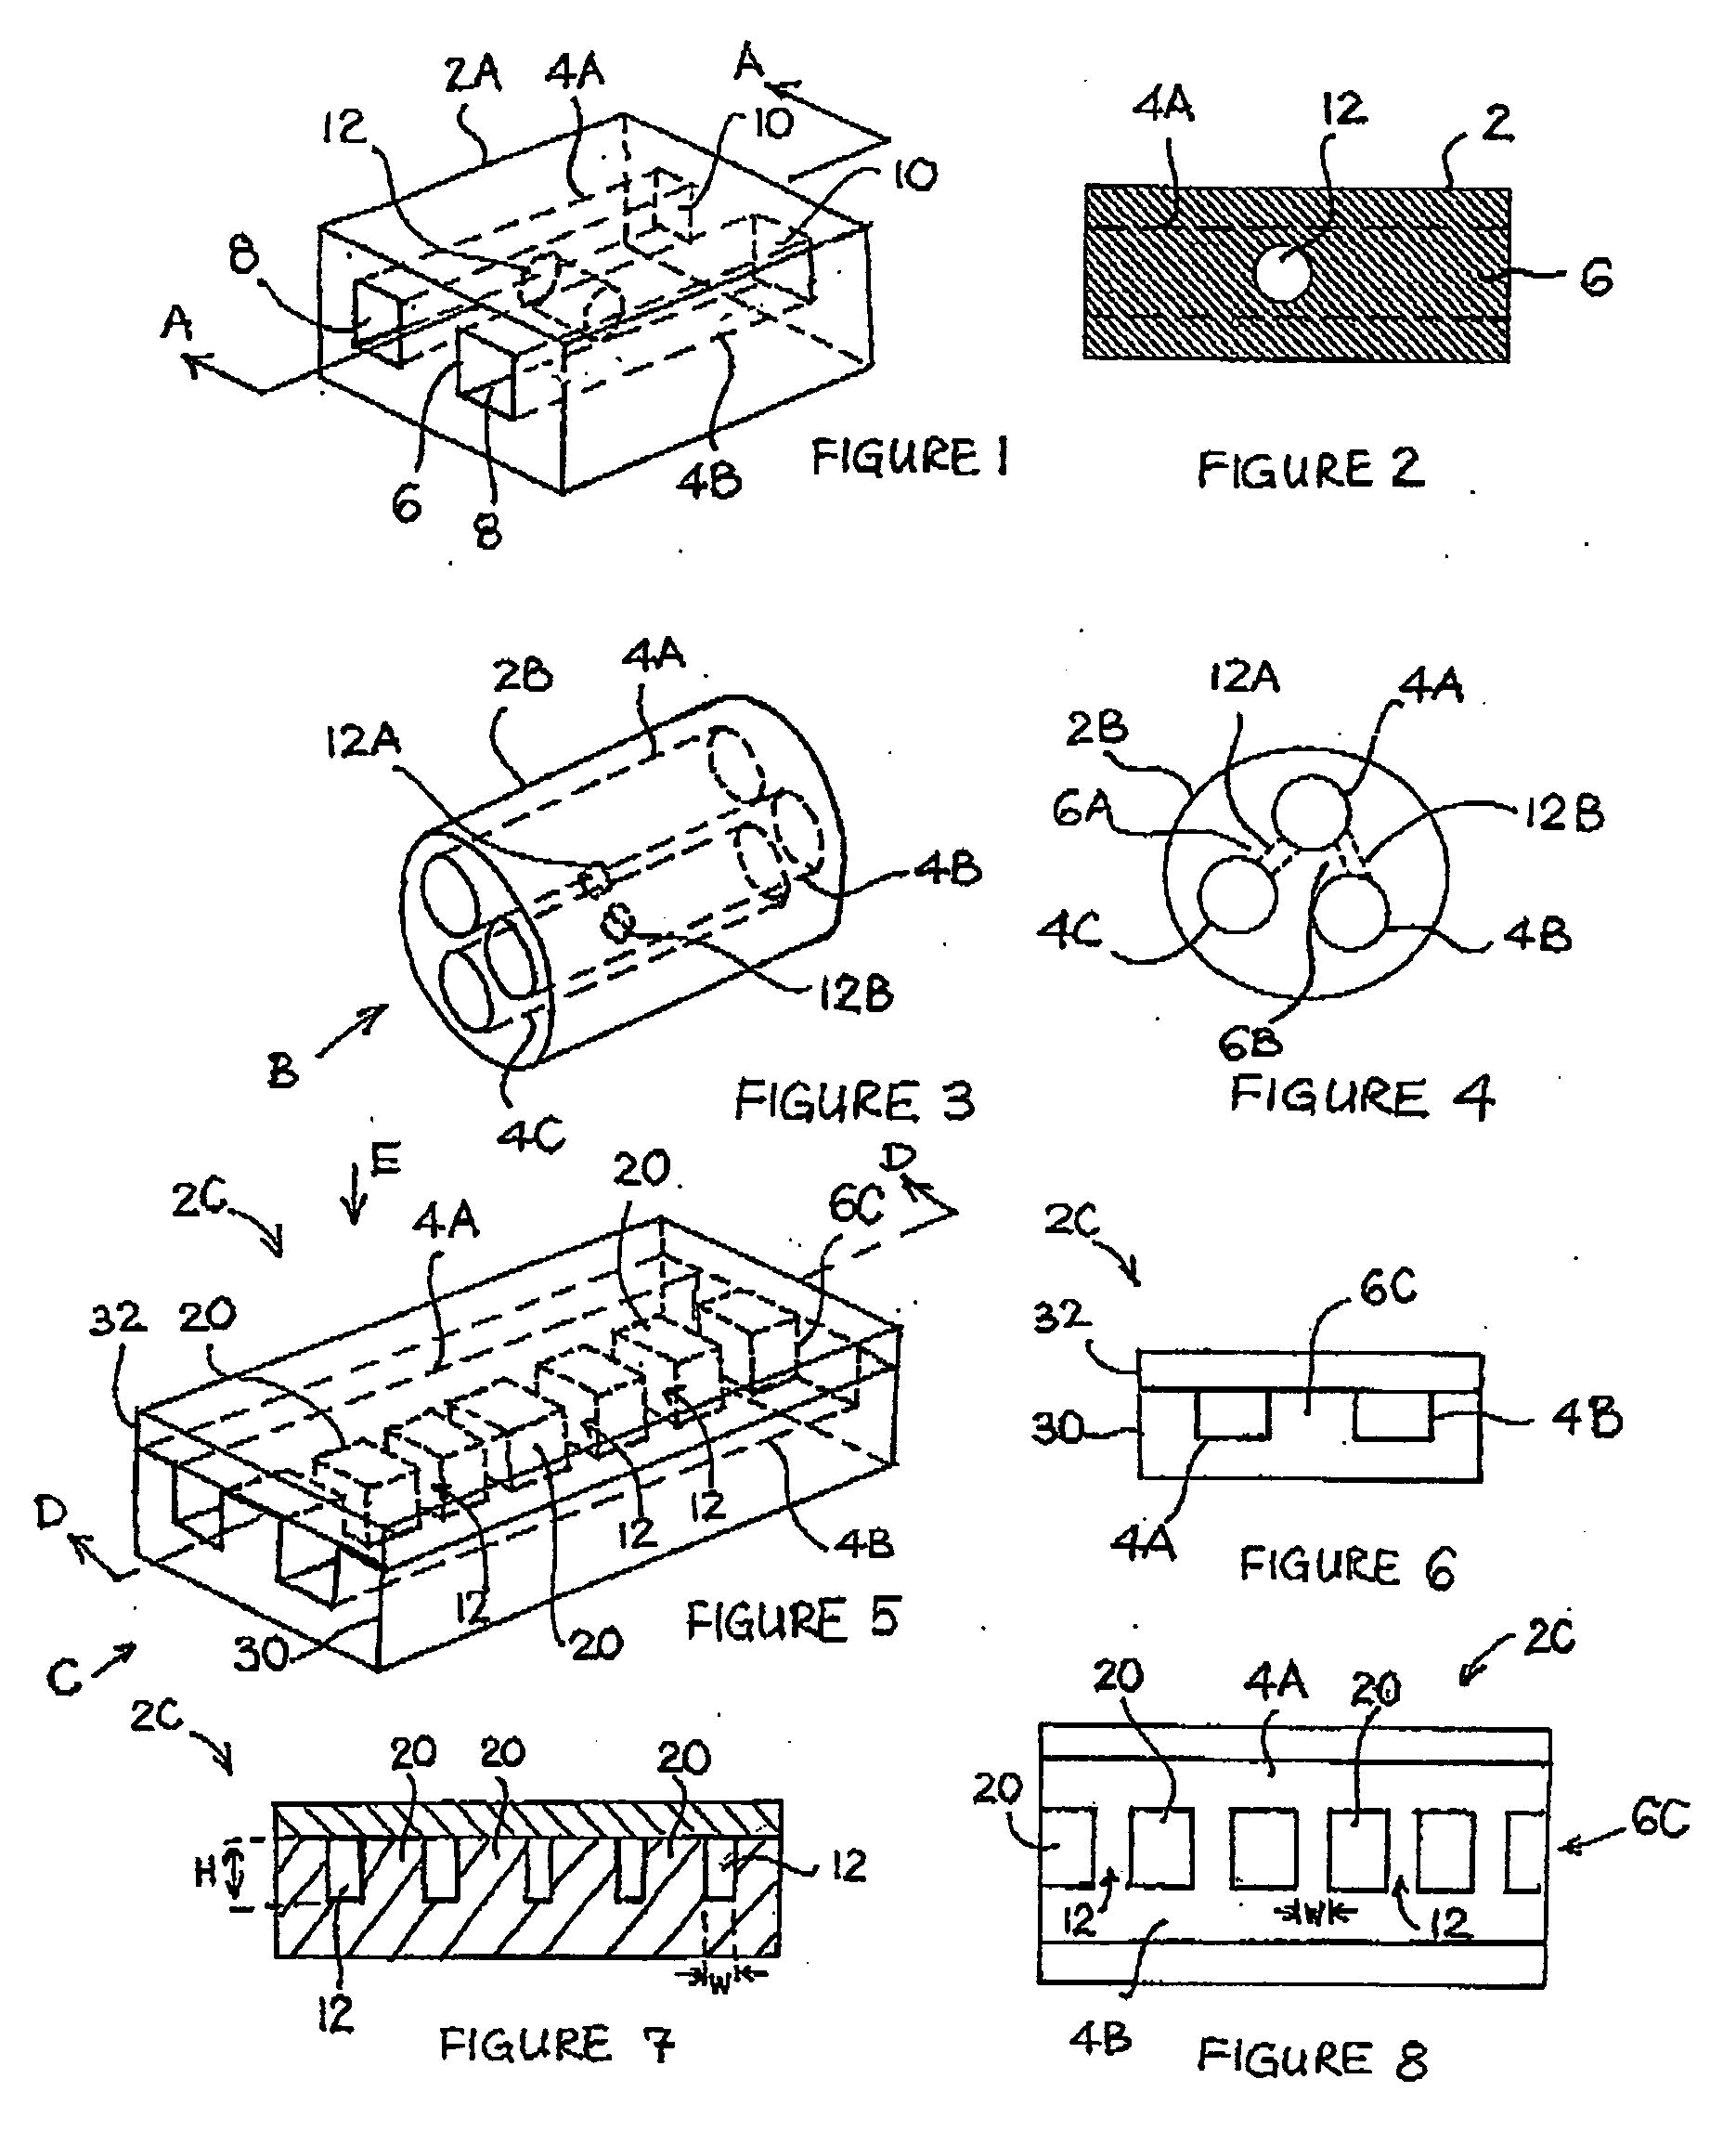 Device and method for studying cell migration and deformation